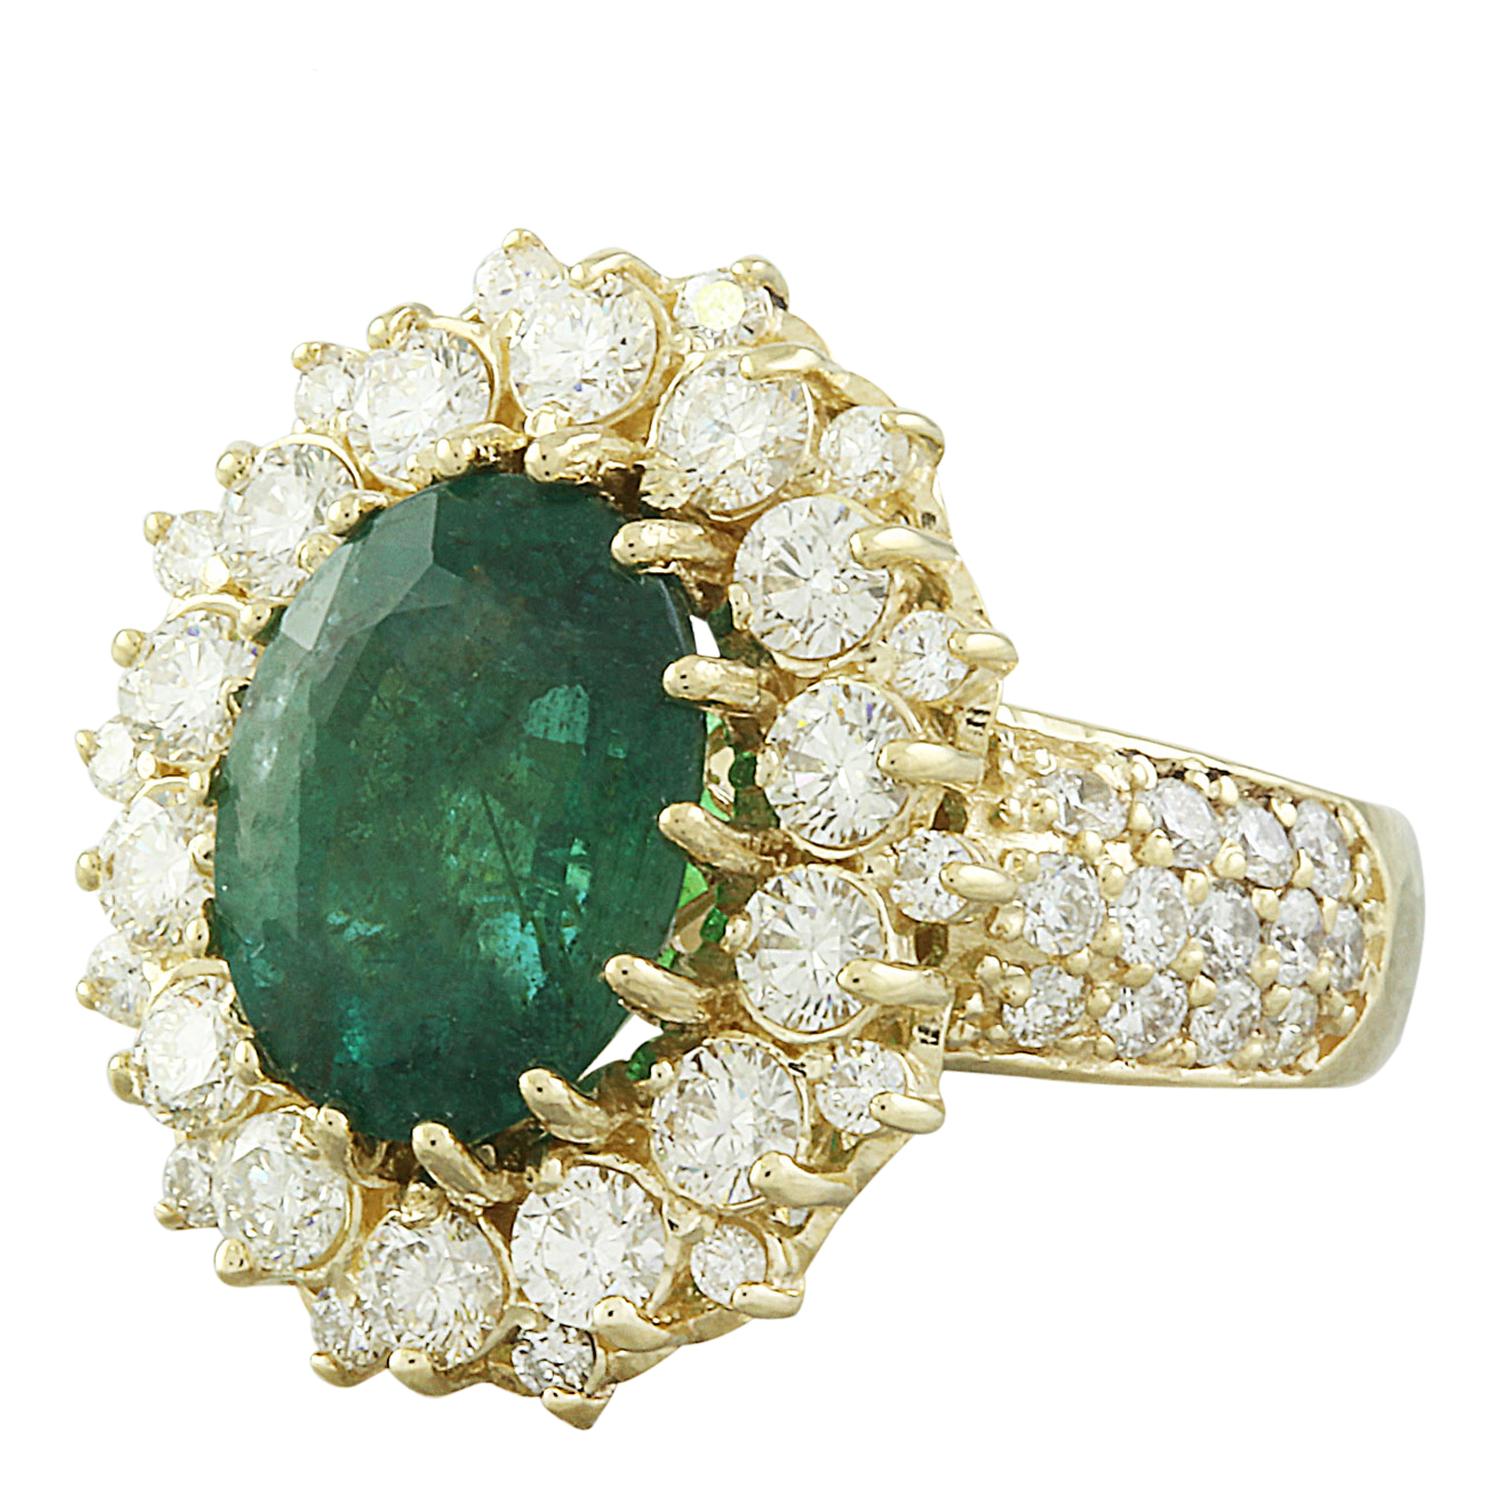 Introducing our exquisite 5.40 Carat Natural Emerald 14K Solid Yellow Gold Diamond Ring, a testament to timeless elegance. This stunning piece bears the authentic 14K stamp and weighs a total of 8.5 grams. At its heart lies a captivating natural